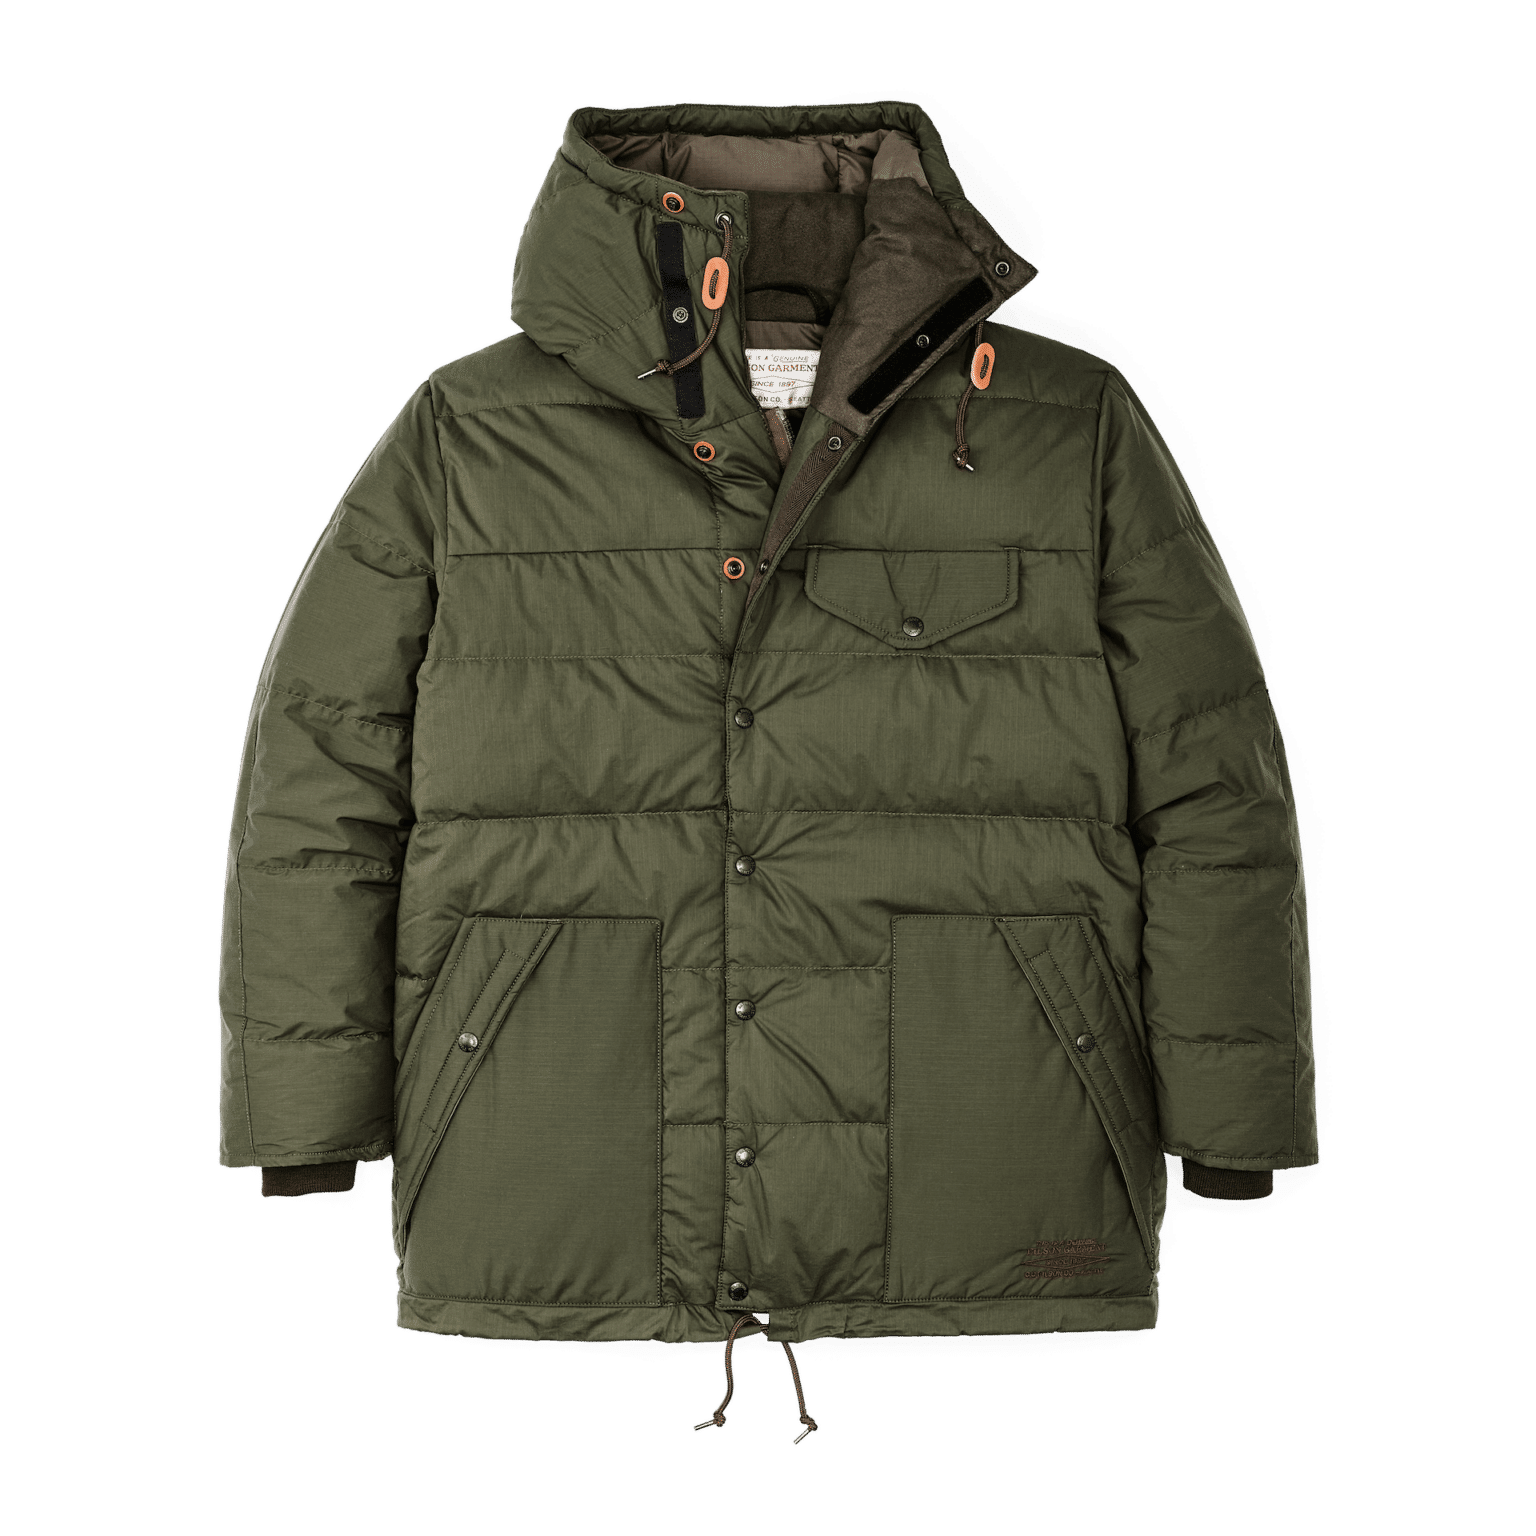 Filson Chilkoot Pass Parka Review [Staff Tested] - LeafScore